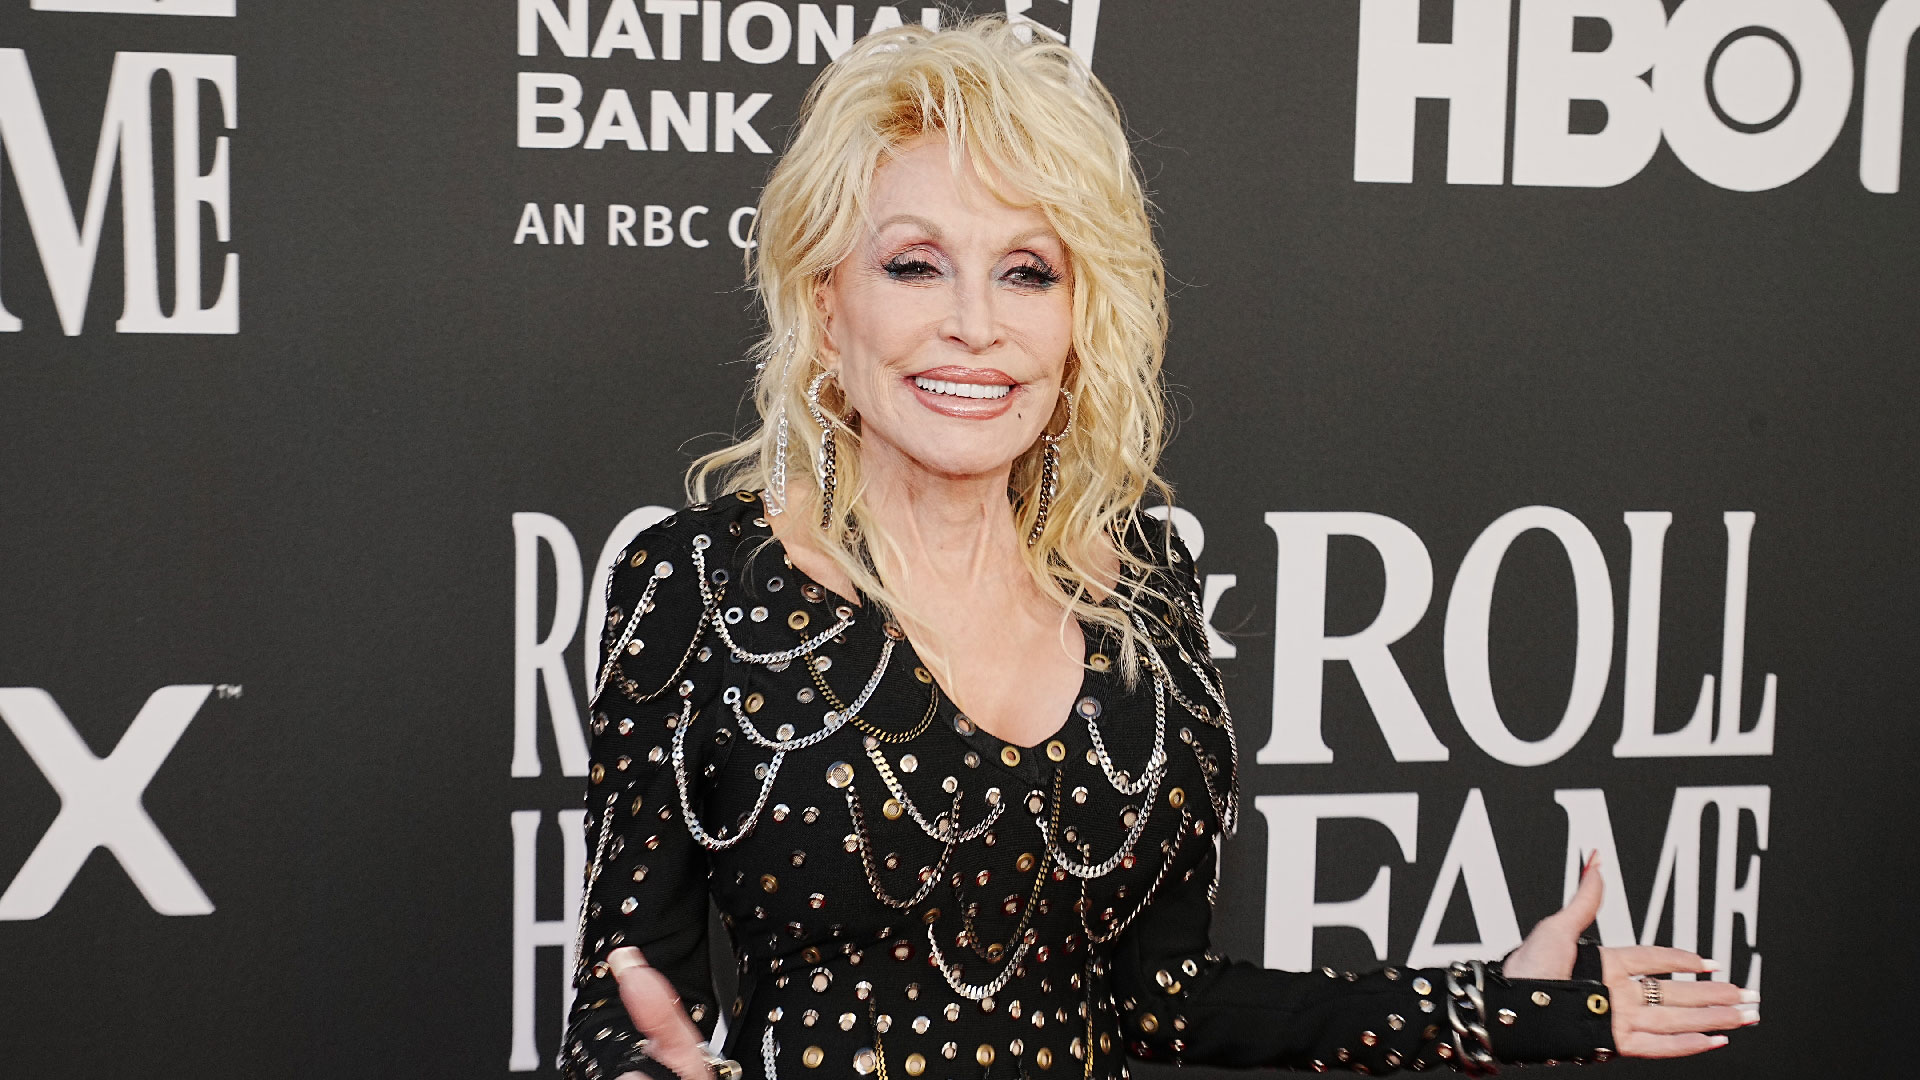 Dolly Parton attends the 37th Annual Rock & Roll Hall Of Fame Induction Ceremony at Microsoft Theater on November 05, 2022 in Los Angeles, California